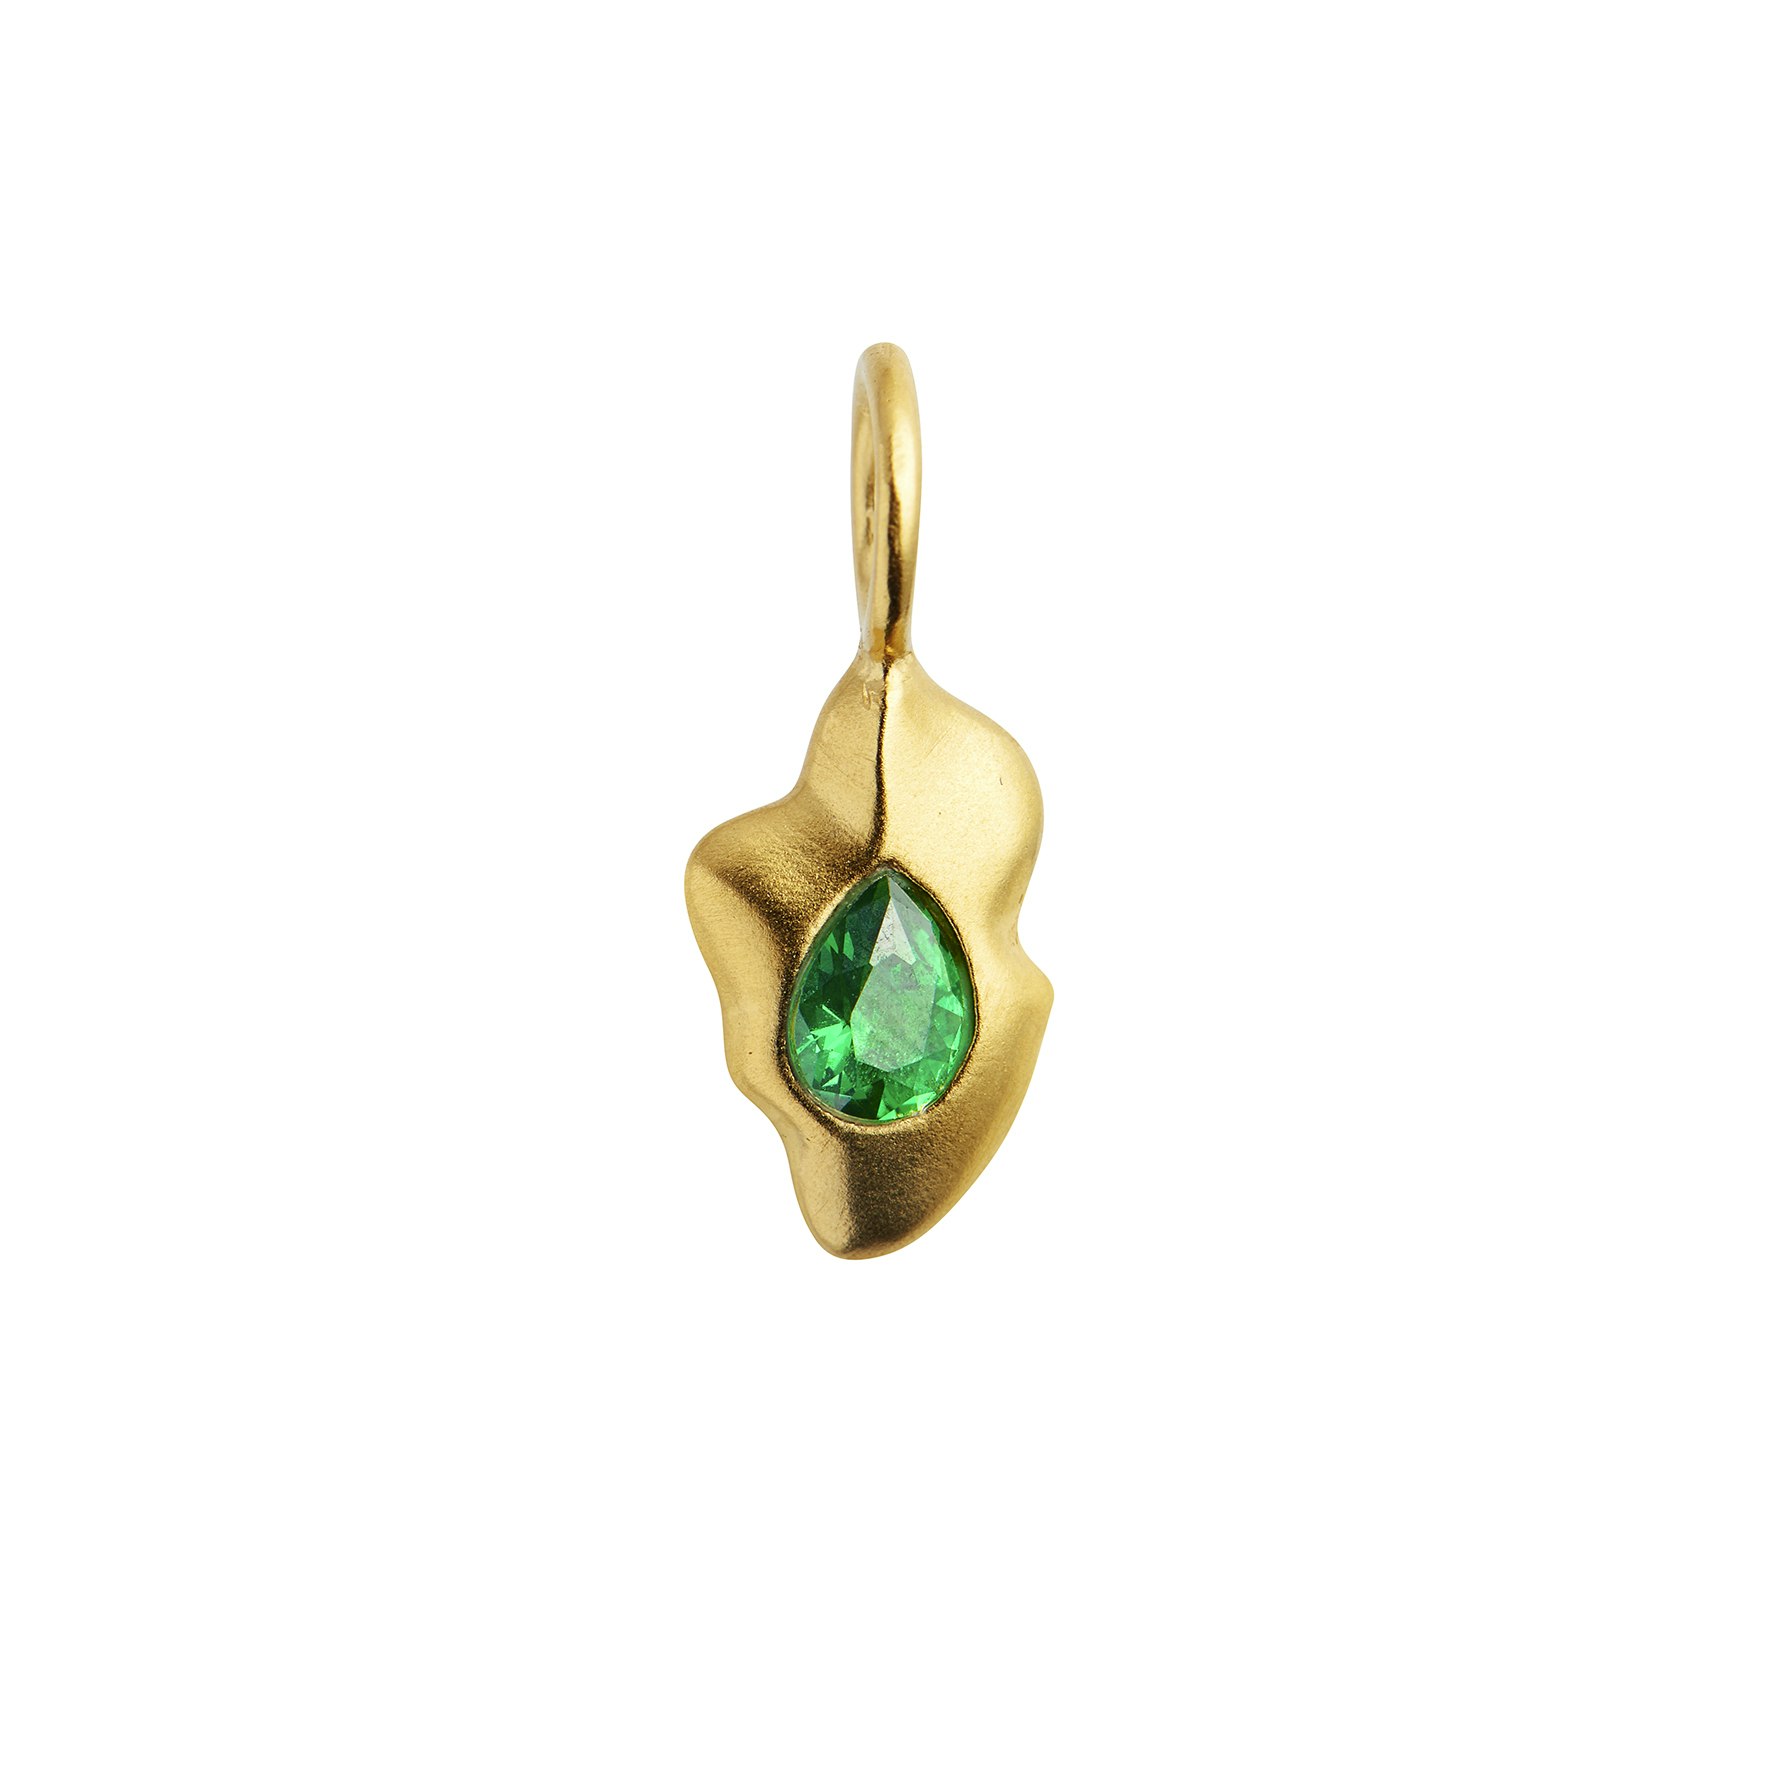 Glimpse Pendant With Green Stone from STINE A Jewelry in Goldplated Silver Sterling 925